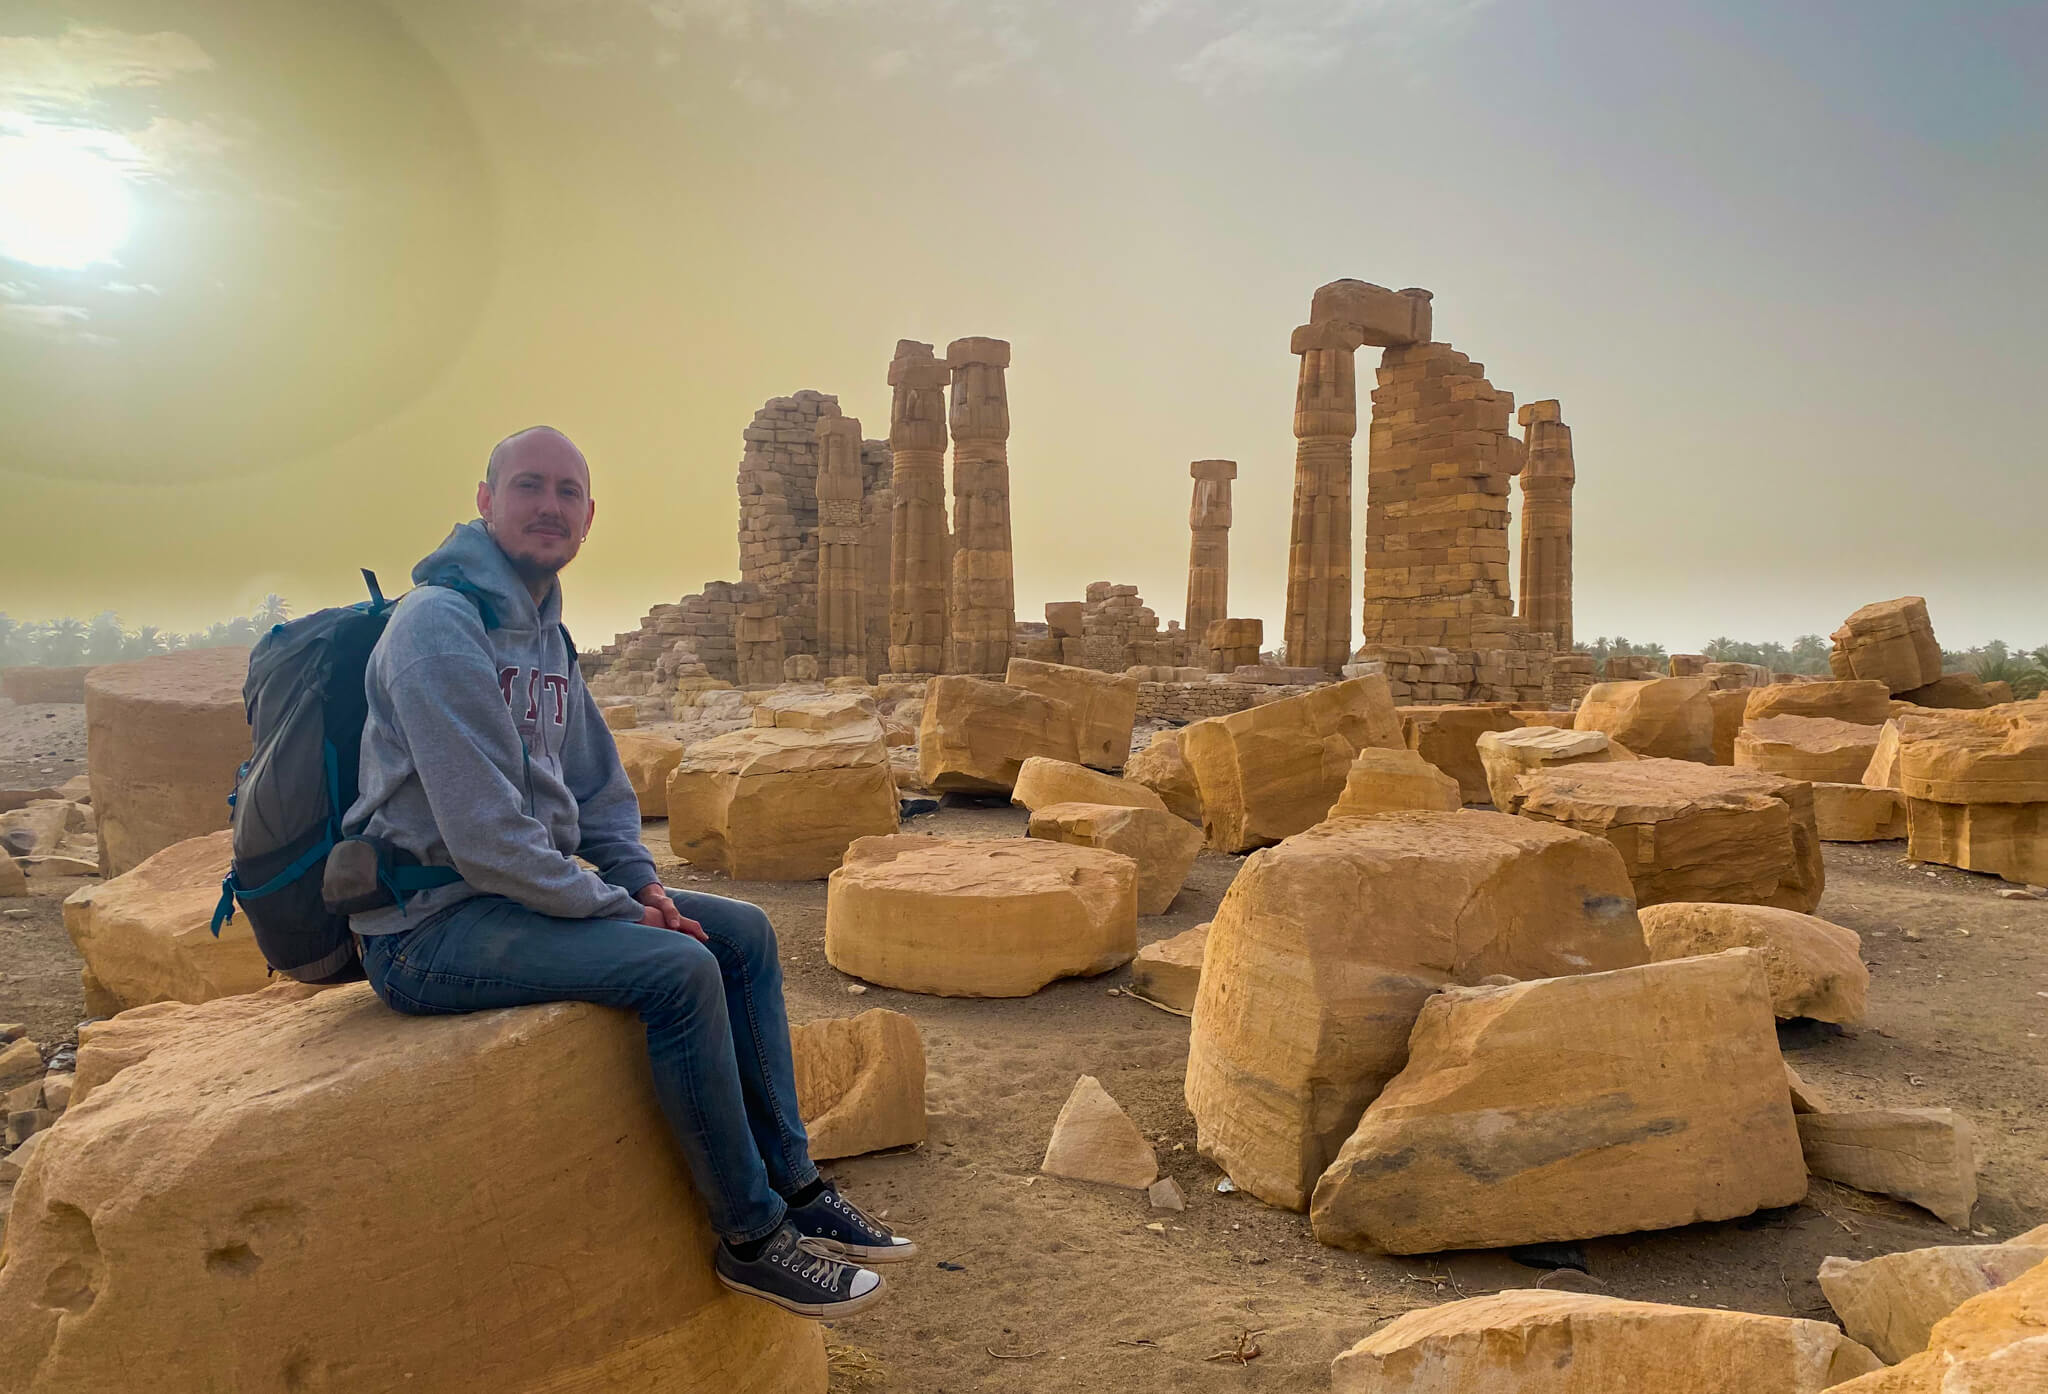 Me, sitting in front of the ruins of the Temple of Soleb at dawn